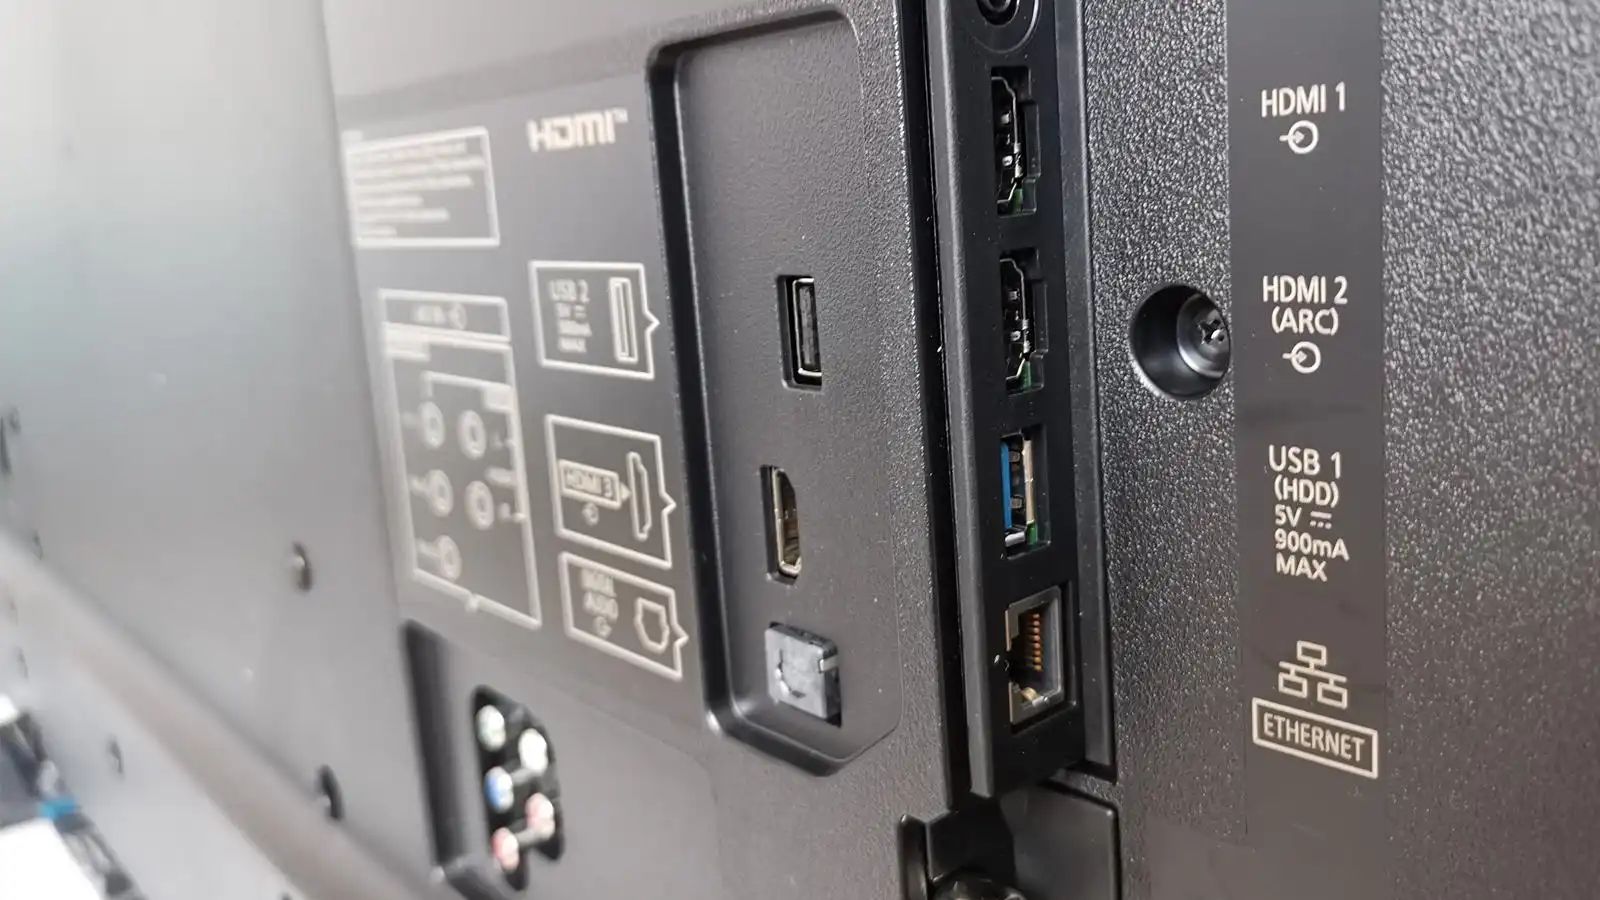 What Is The Use Of HDMI Port In LED TV